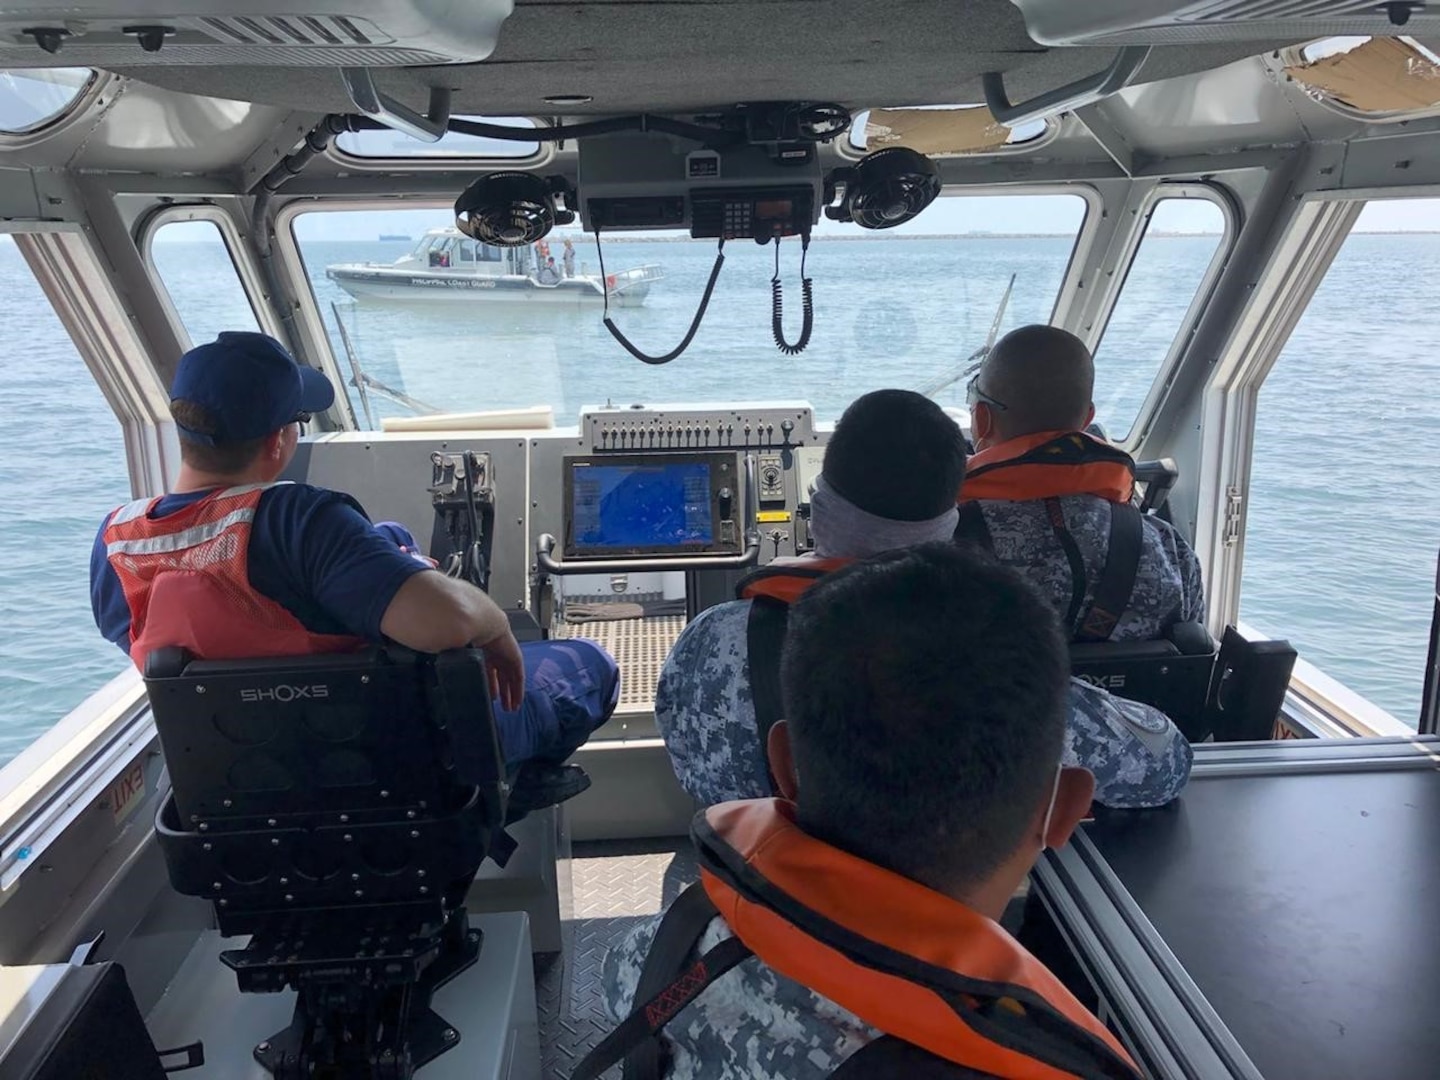 U.S. Concludes Training Series for Philippine Coast Guard